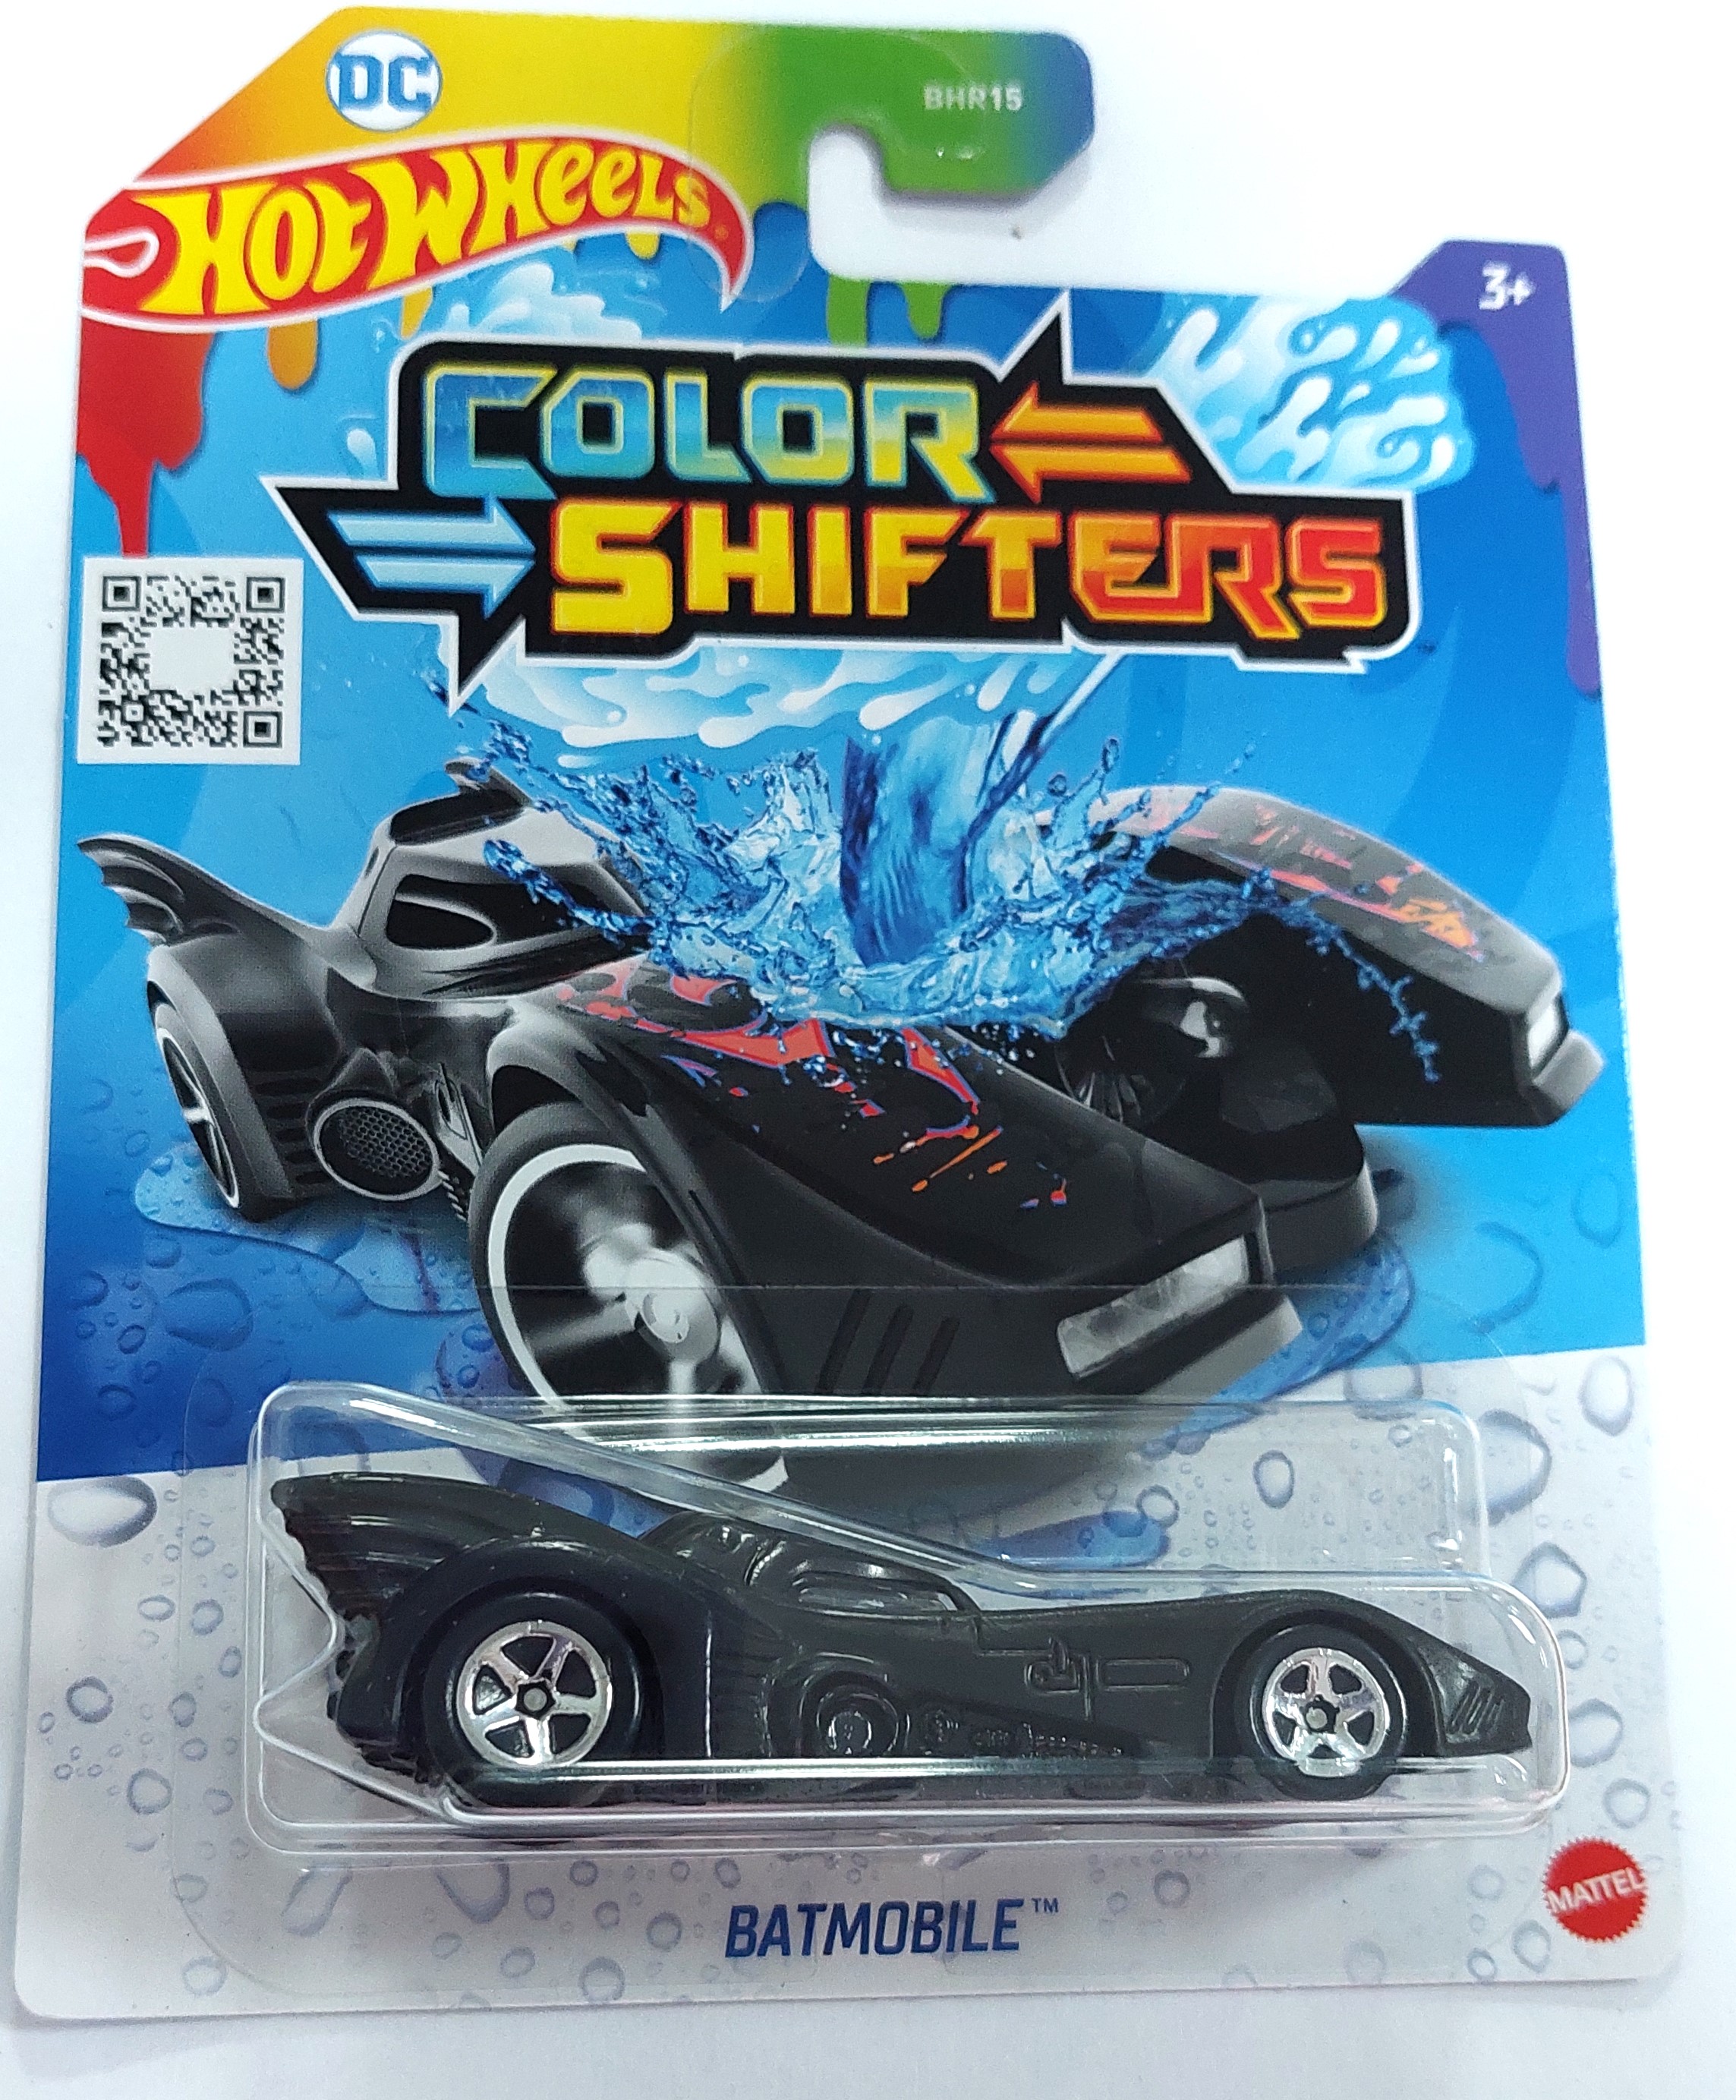 Машинка Hot Wheels BHR15 Color Shifters Batmobile, GBF30-LA15 машинка hot wheels color shifters fish d